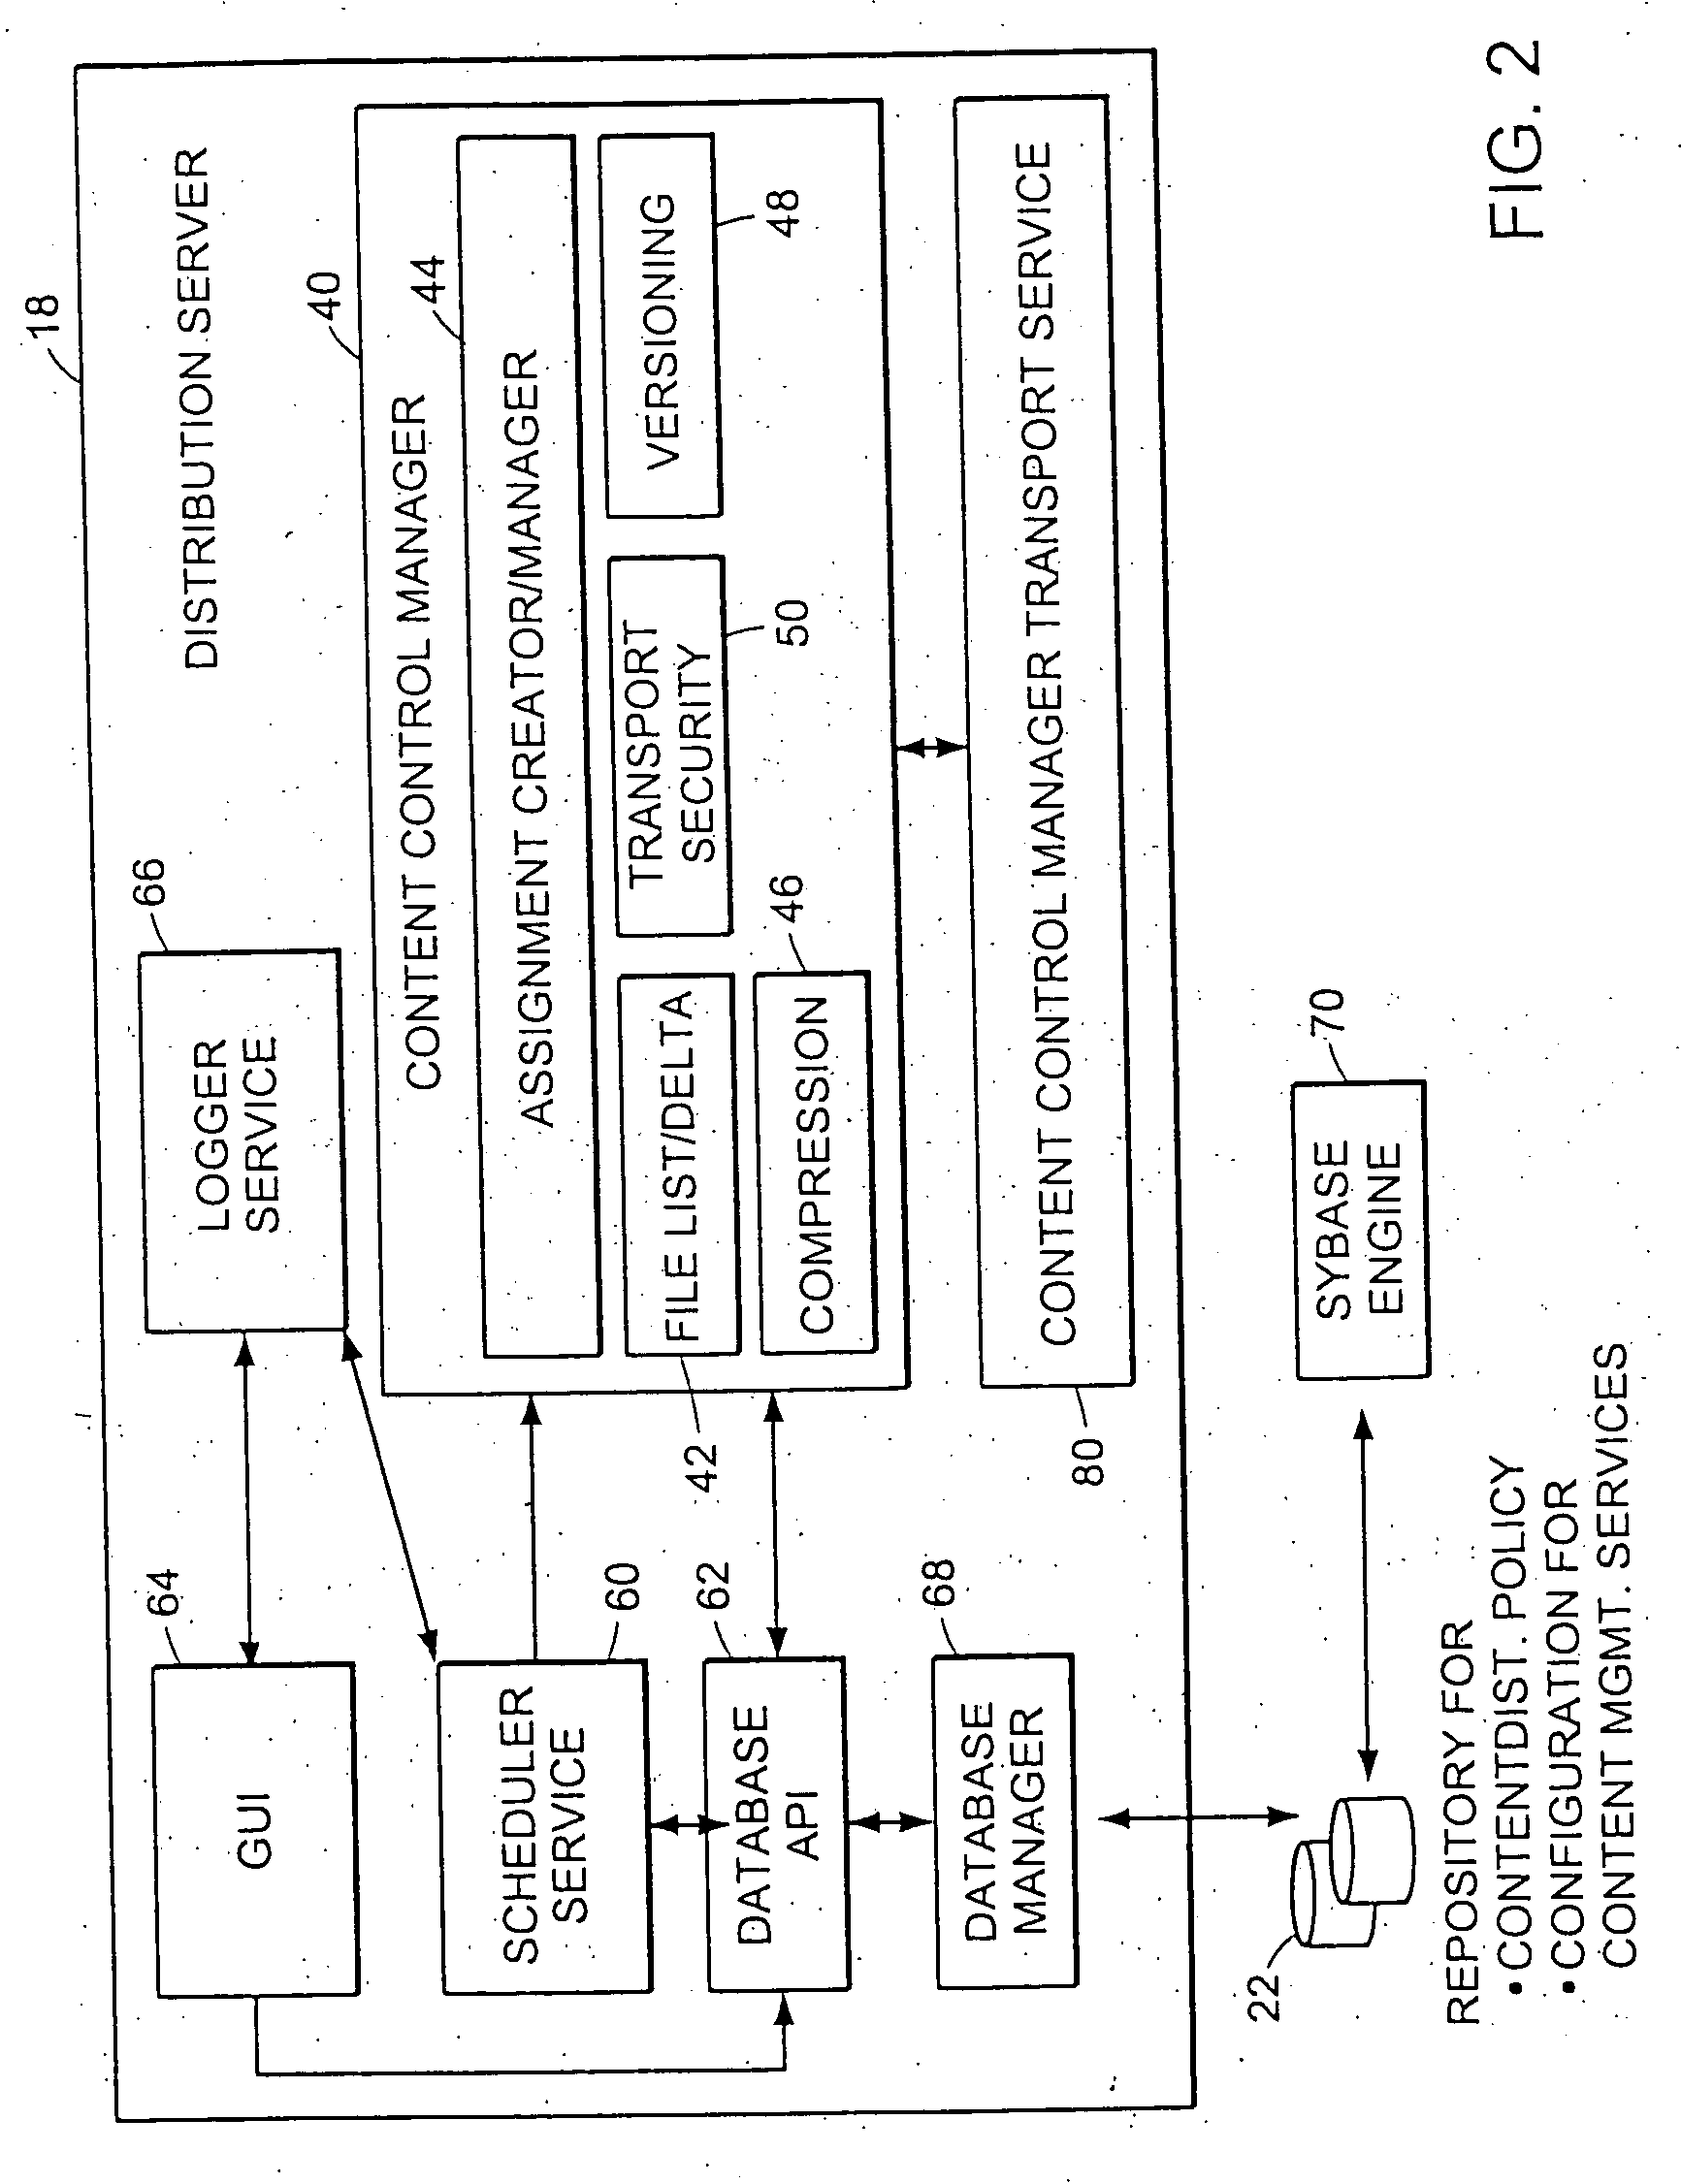 Method and apparatus for election of group leaders in a distributed network